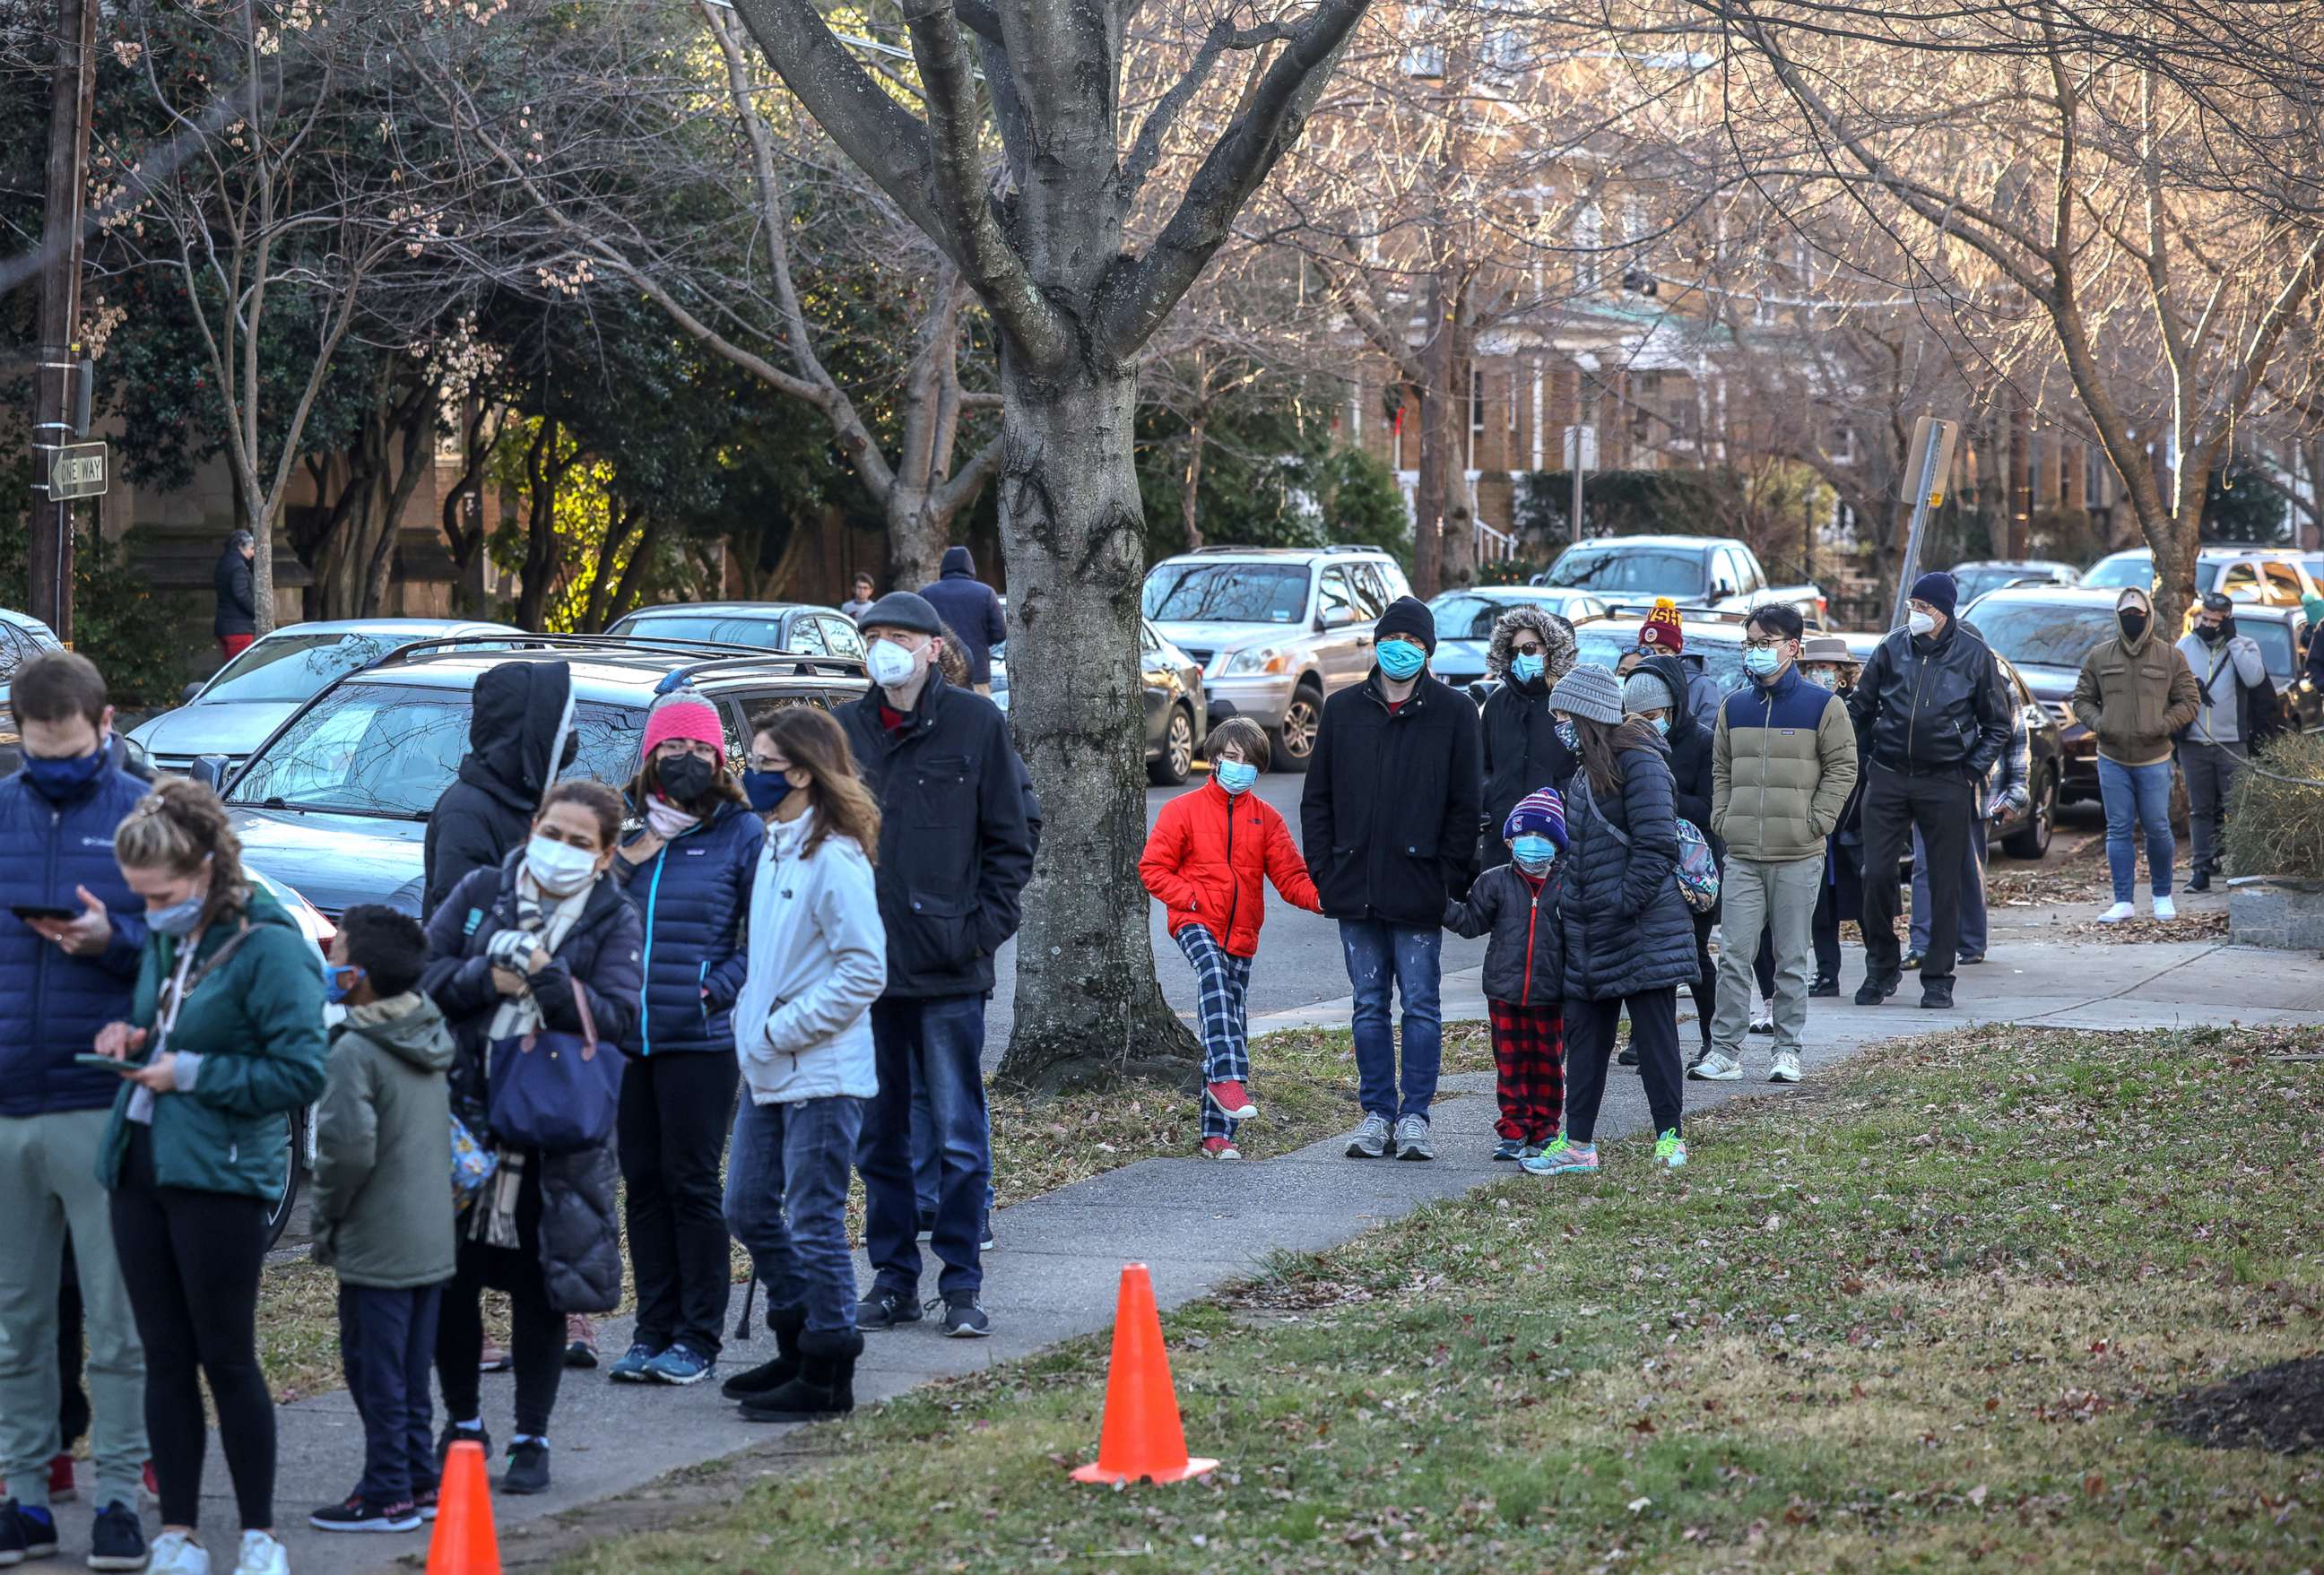 PHOTO: People wait in long lines to take a free COVID-19 test at a local fire station in Washington, D.C., Dec. 20, 2021.